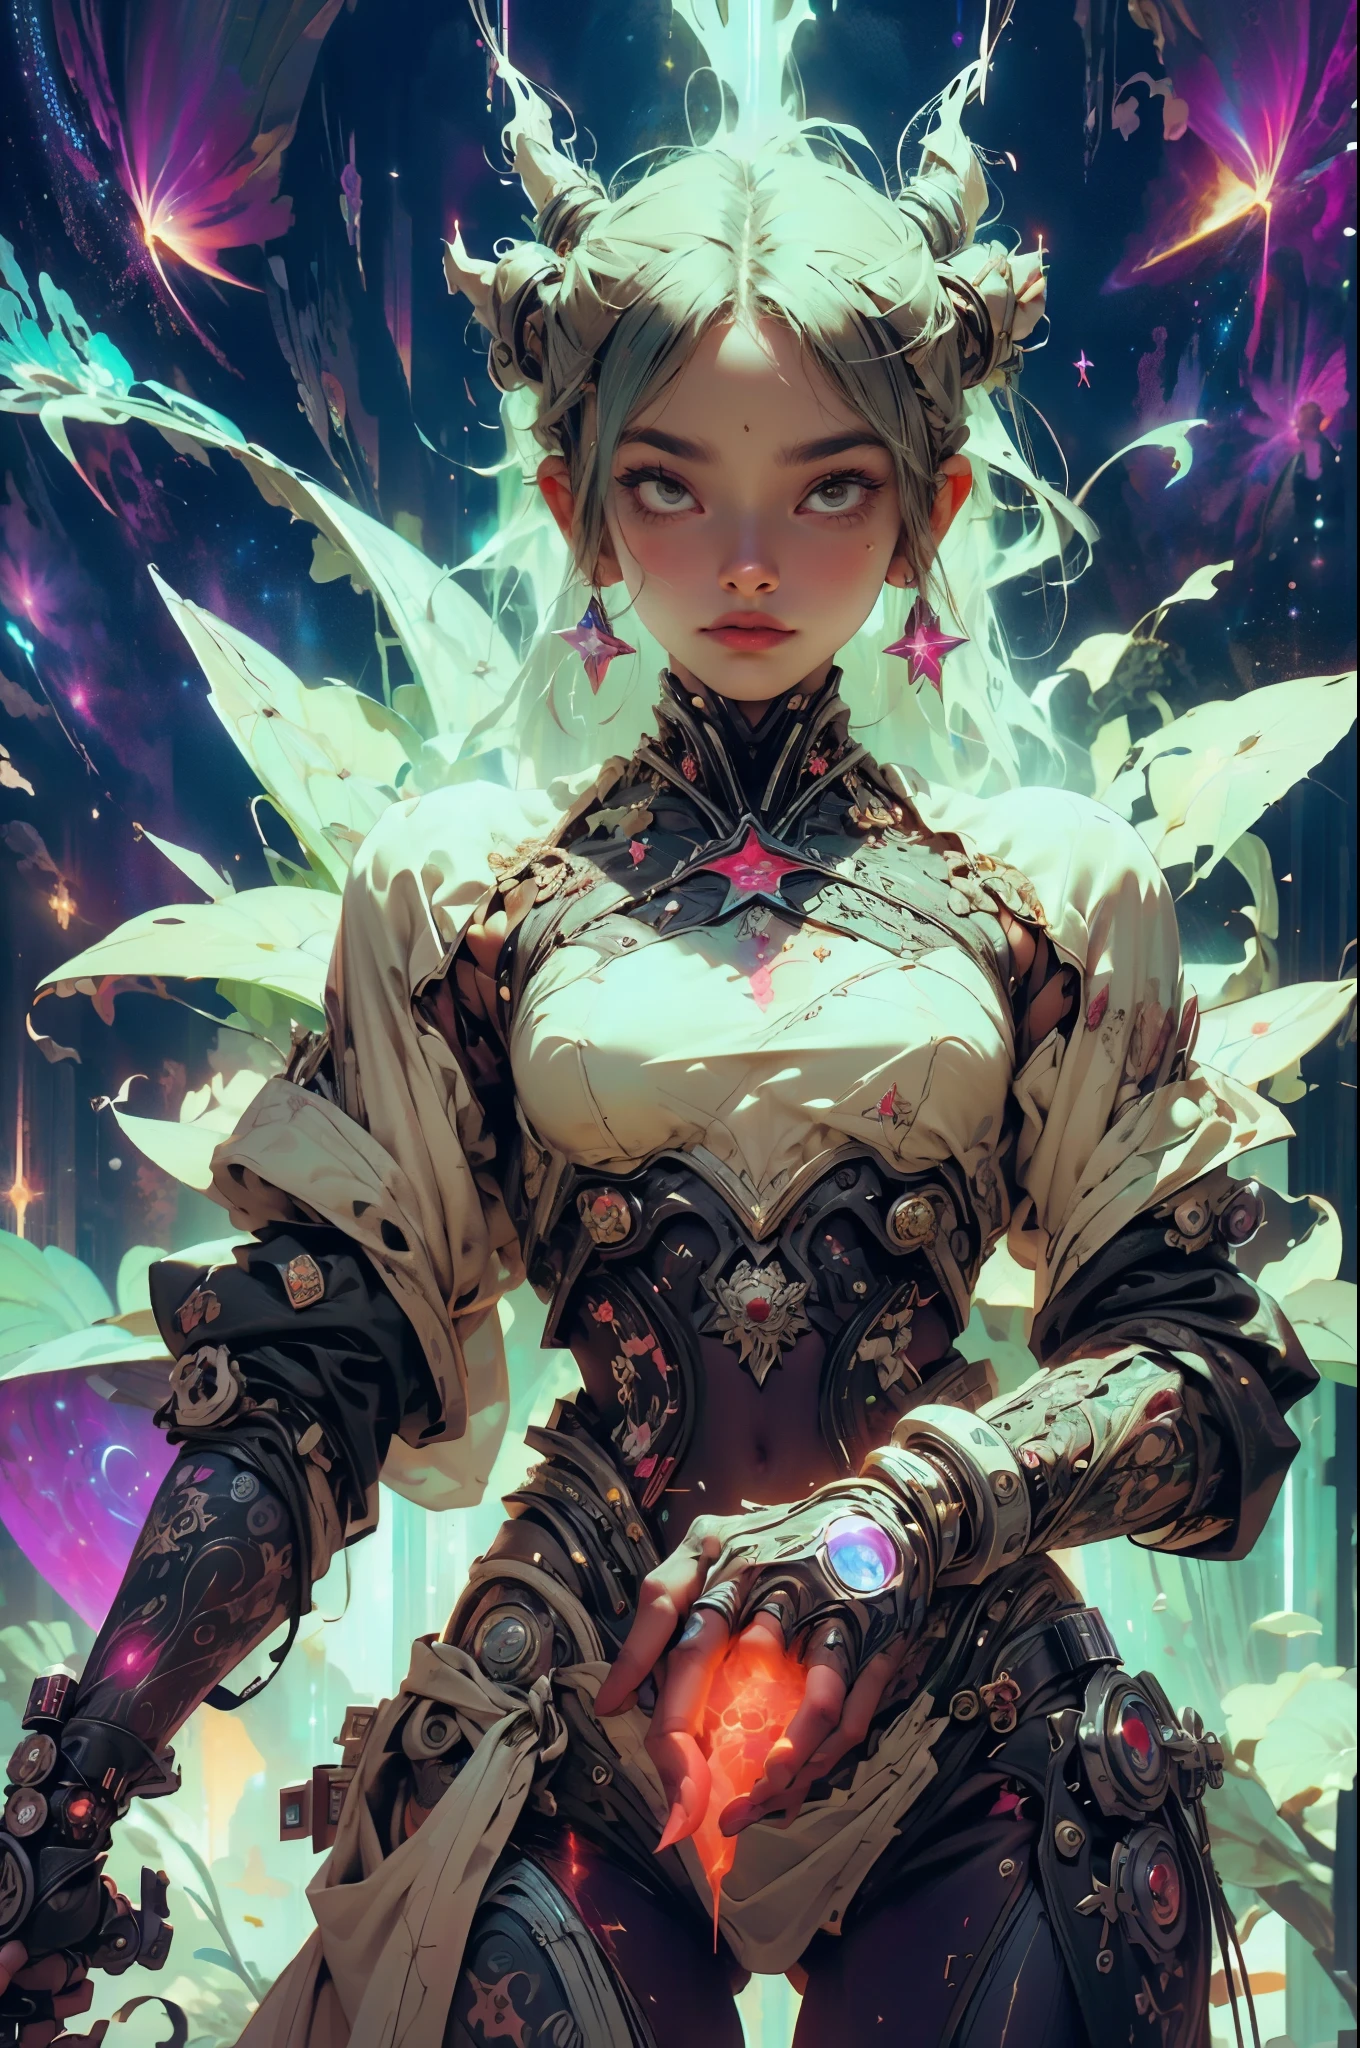 there is a screenshot of a woman in a space suit, cosmic girl, event, cosmic entity, incrinate content details, endless cosmos in the background, historical event, real event, astral background, cosmic background, cosmic goddess, cyborg goddess in cosmos, celestial cosmos, game interface, violet battlefield theme, cosmic style, hyperdetailed content, background details